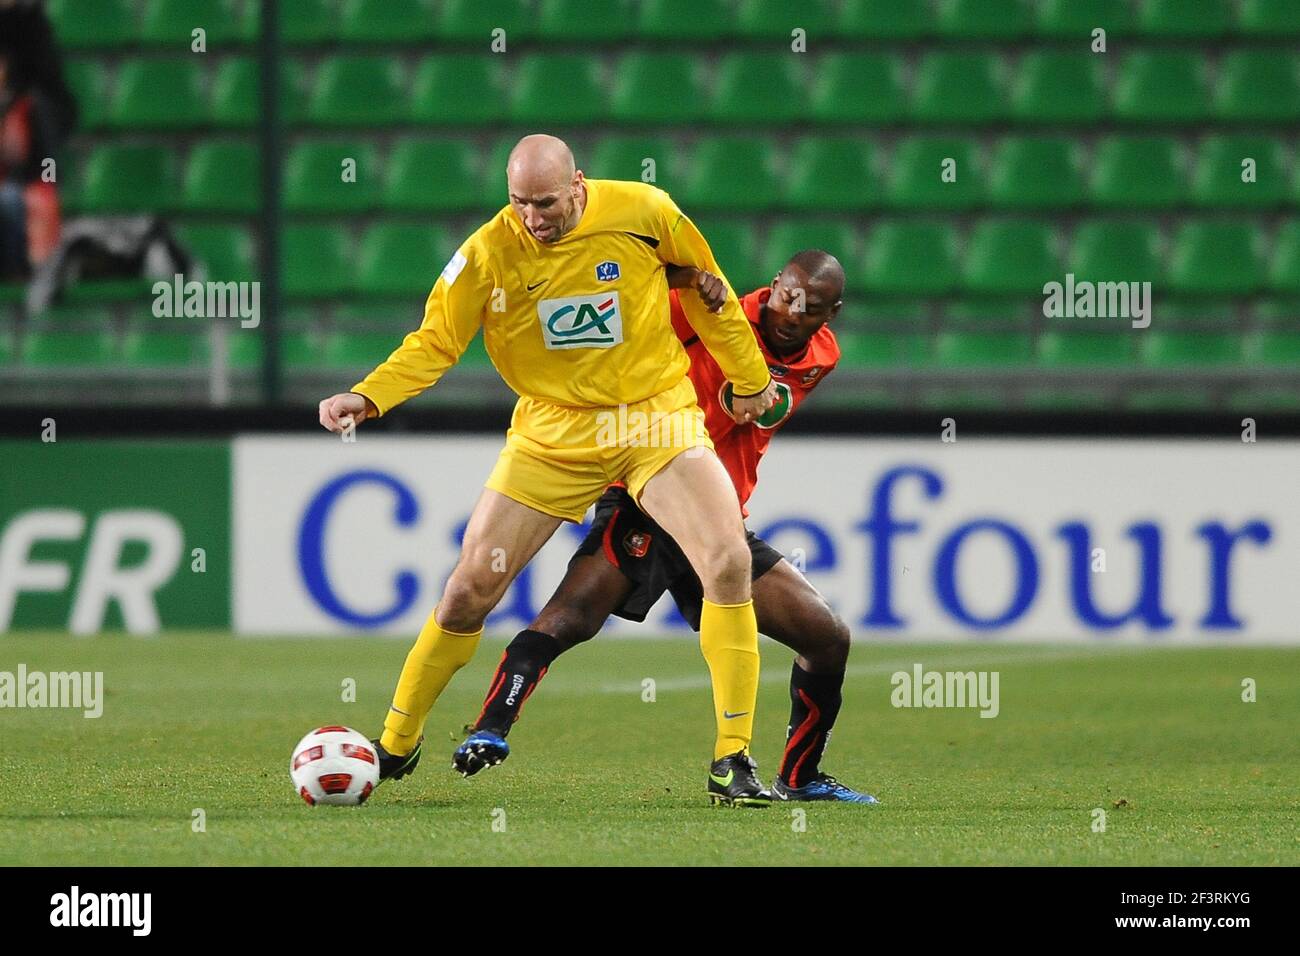 FOOTBALL - FRENCH CUP 2010/2011 - 1/32 FINAL - STADE RENNAIS v AS CANNES - 9/01/2011 - PHOTO PASCAL ALLEE / DPPI - JAN KOLLER (CAN) Stock Photo